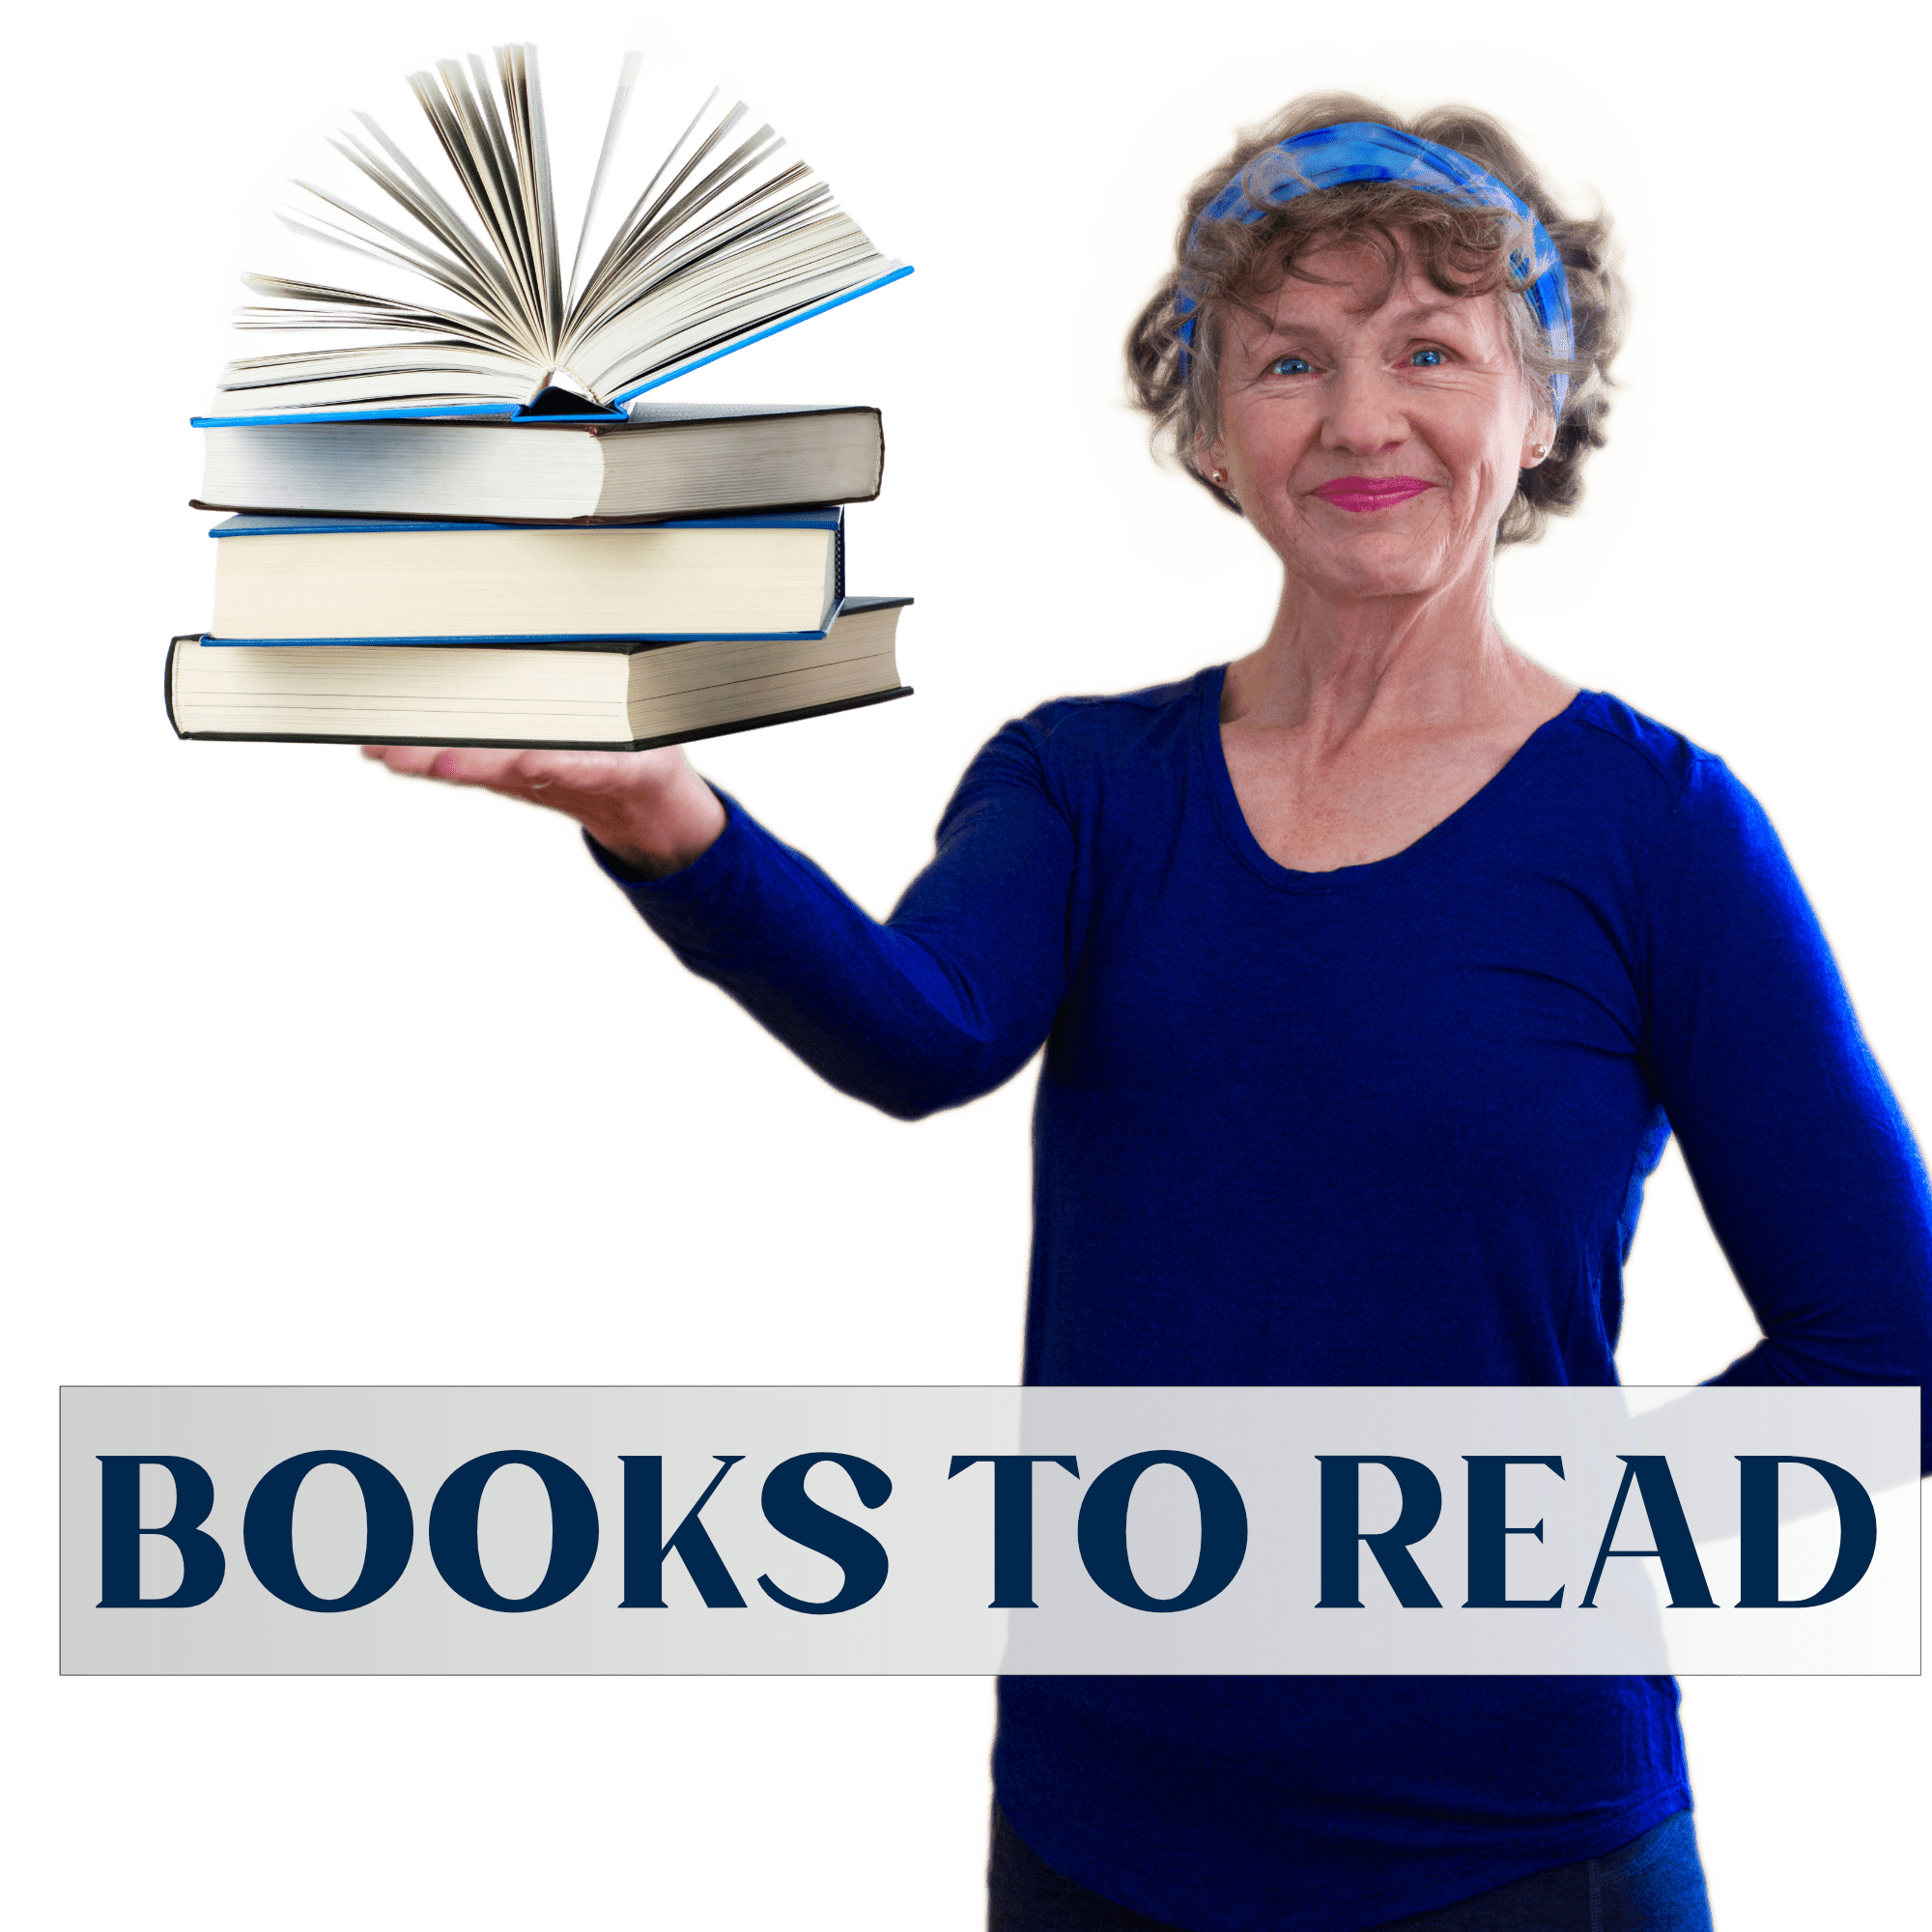 osteoporosis books I recommend